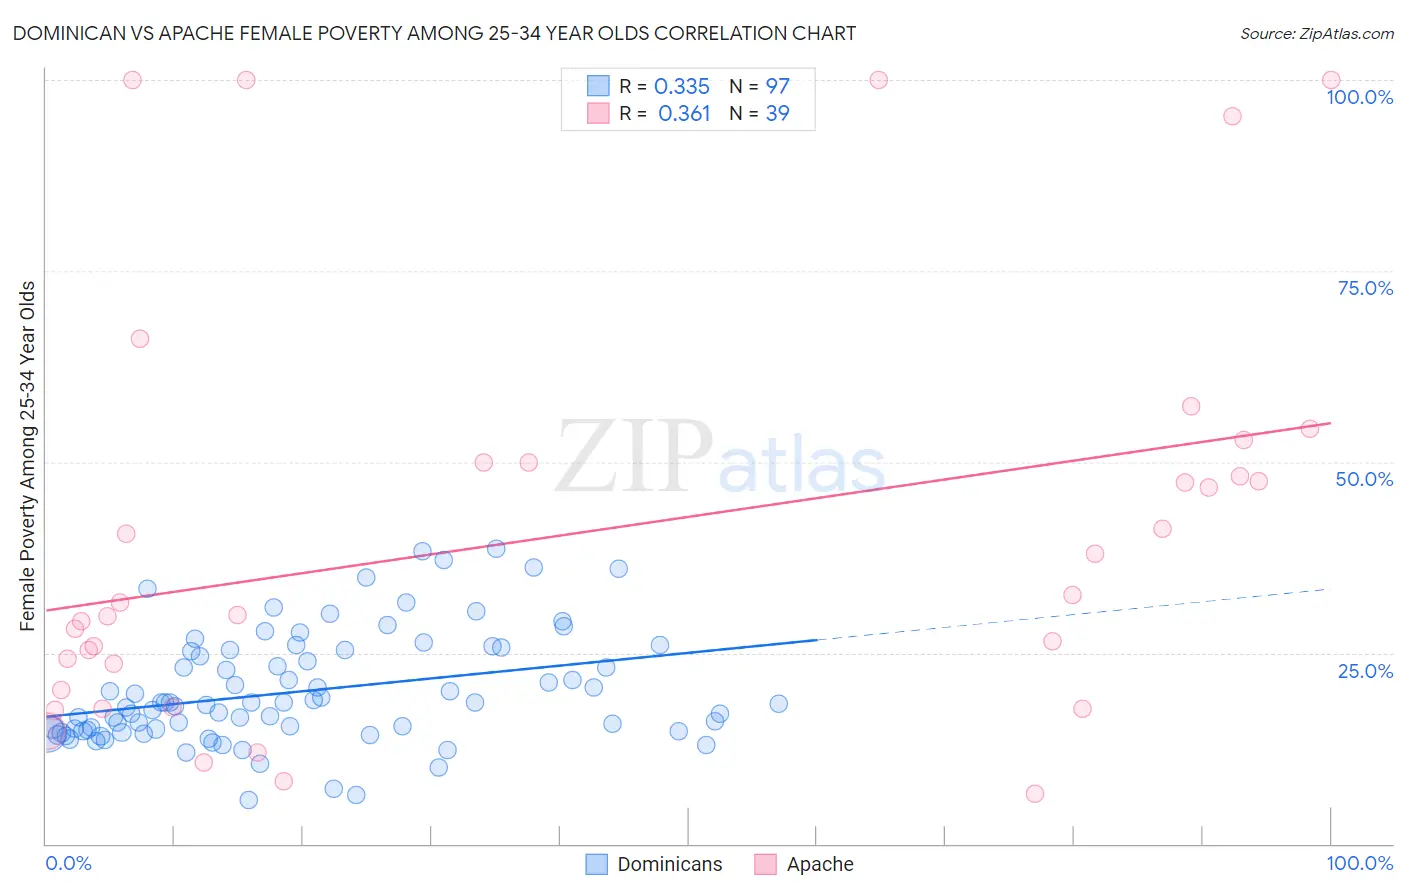 Dominican vs Apache Female Poverty Among 25-34 Year Olds